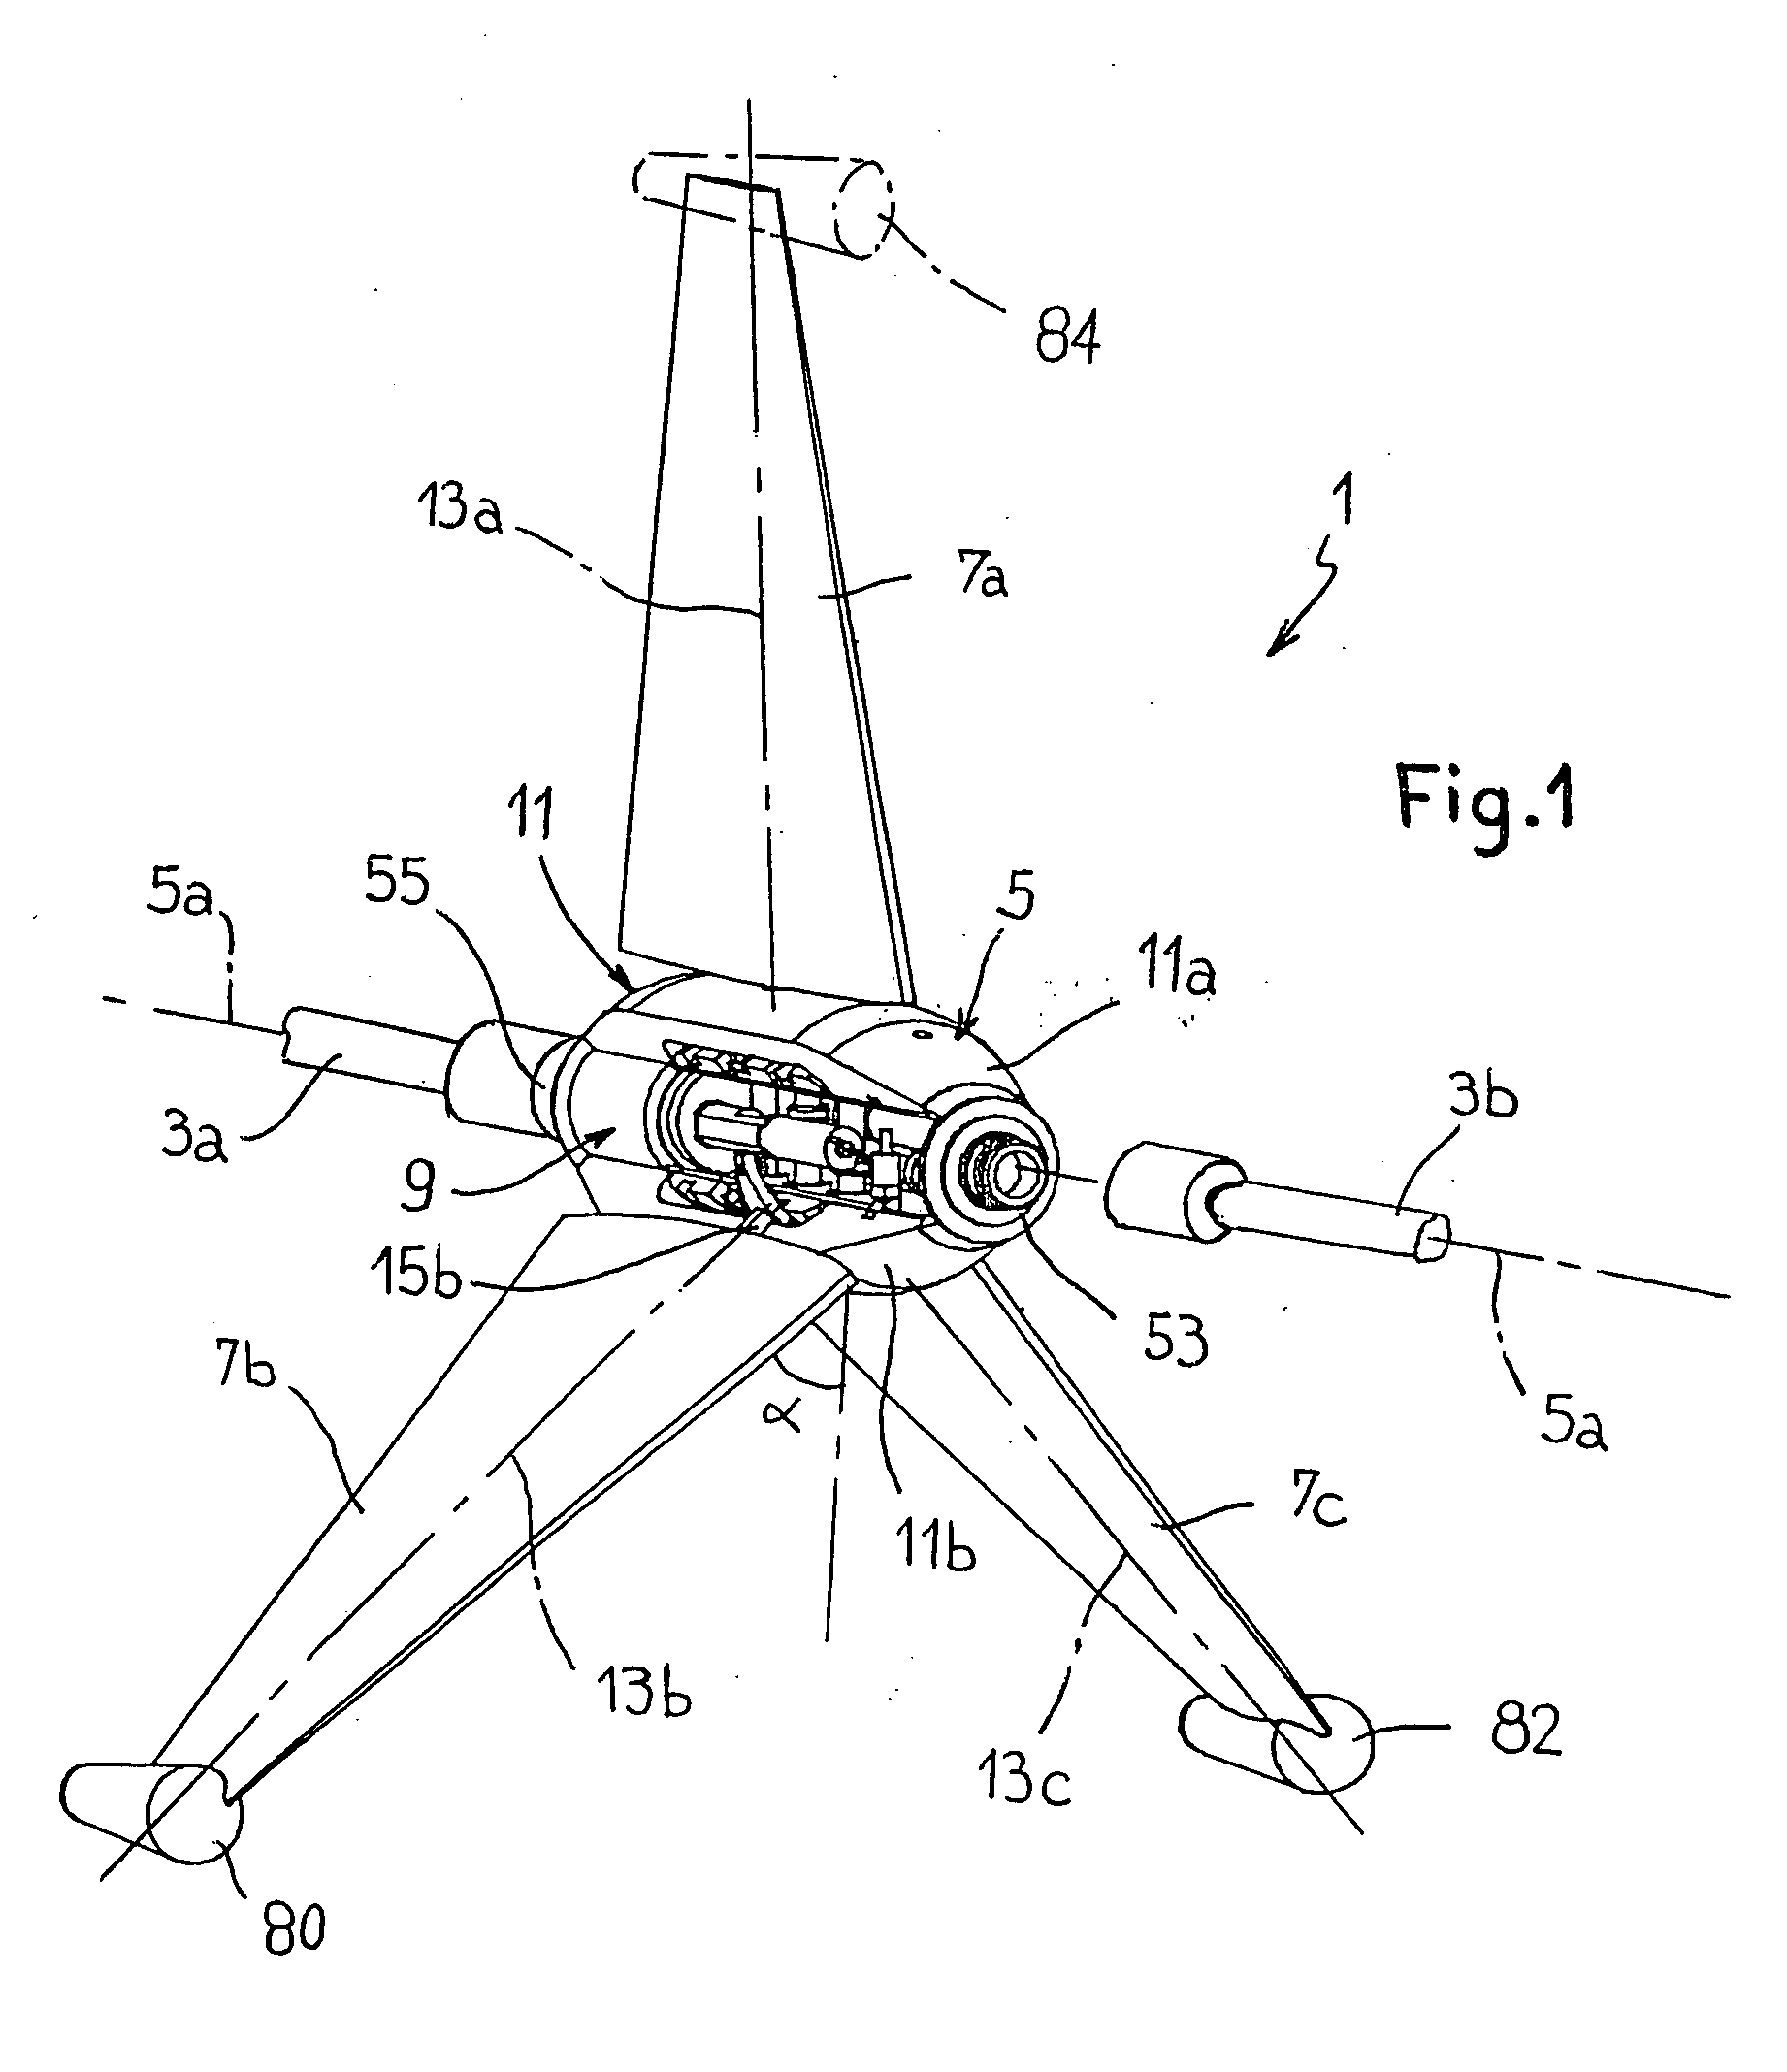 Device for controlling steering of a towed underwater object